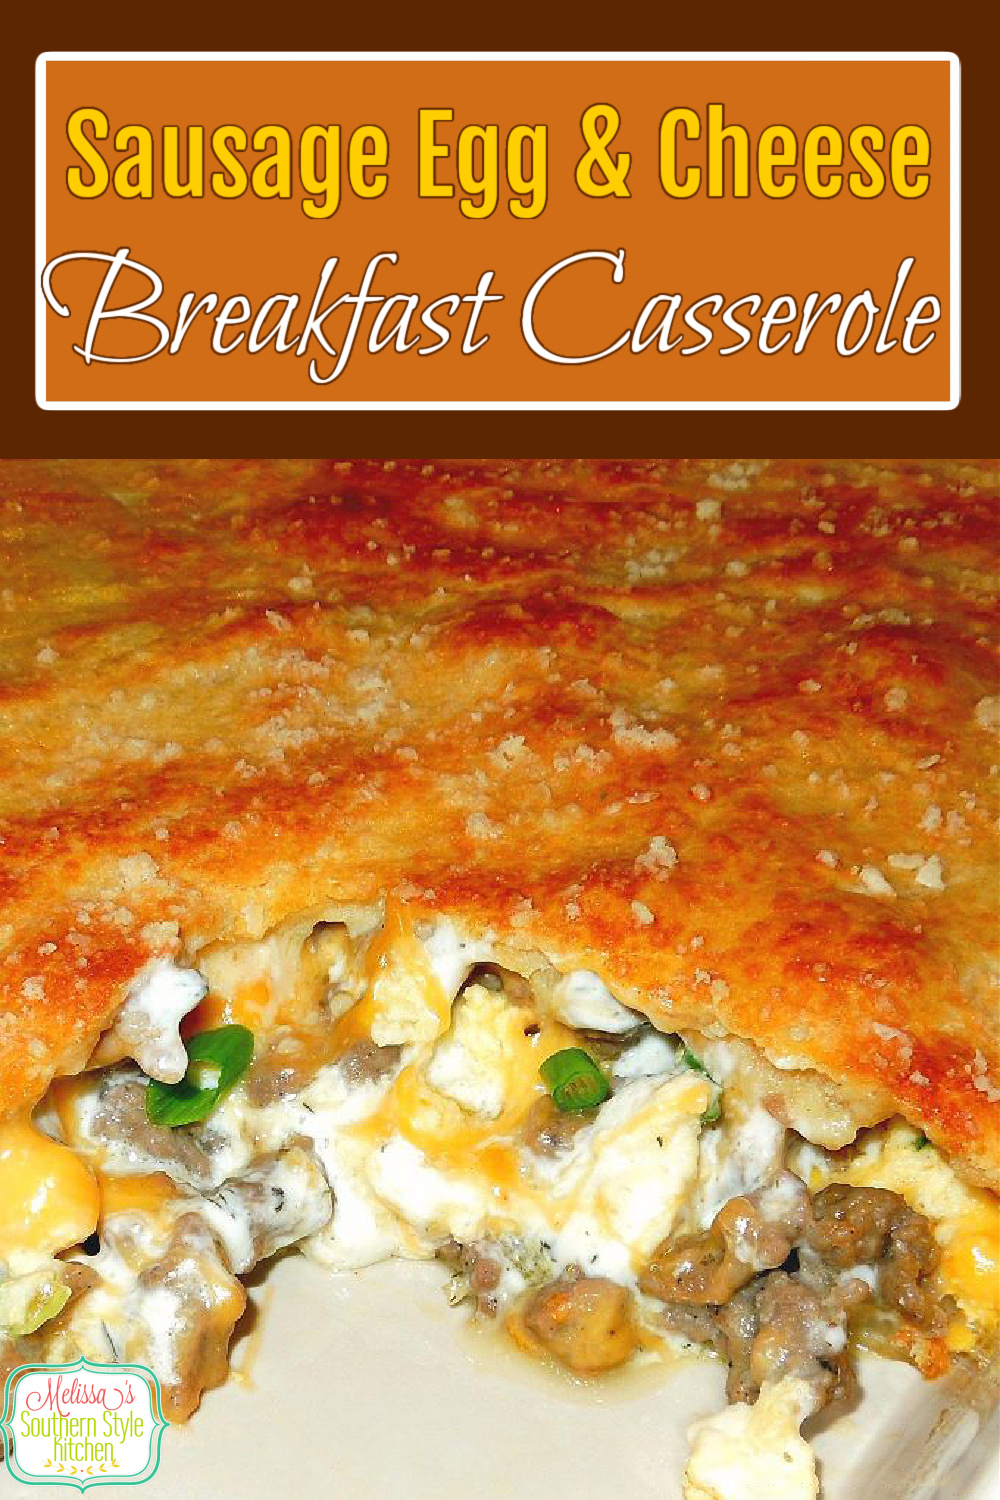 Start your morning right with a piece of Sausage Egg and Cheese Breakfast Casserole #breakfastcasserole #brunch #overnightcasserole #sausageanseggs #sausageeggandcheese #sausageandeggcasserole #casserolerecipes #casseroles #holidaybrunch #southernfood #southernrecipes via @melissasssk